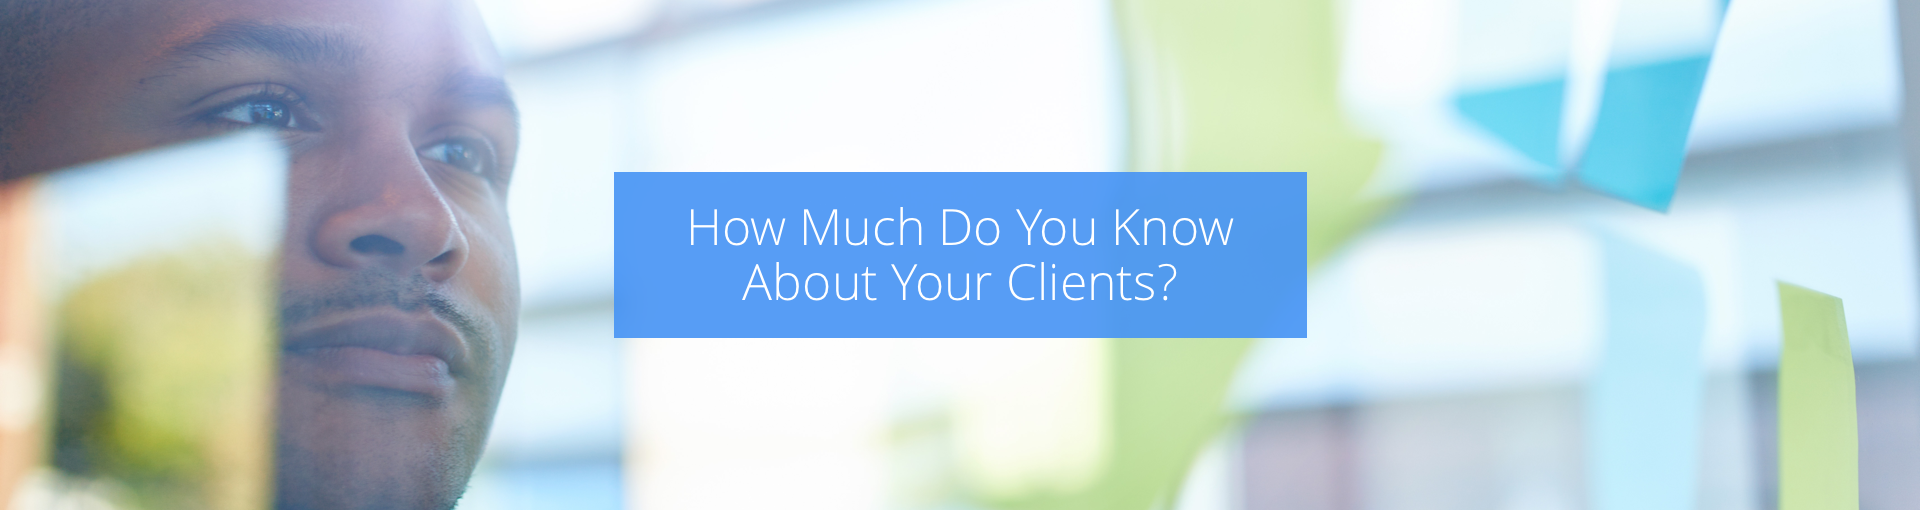 How Much Do You Know About Your Clients? Featured Image